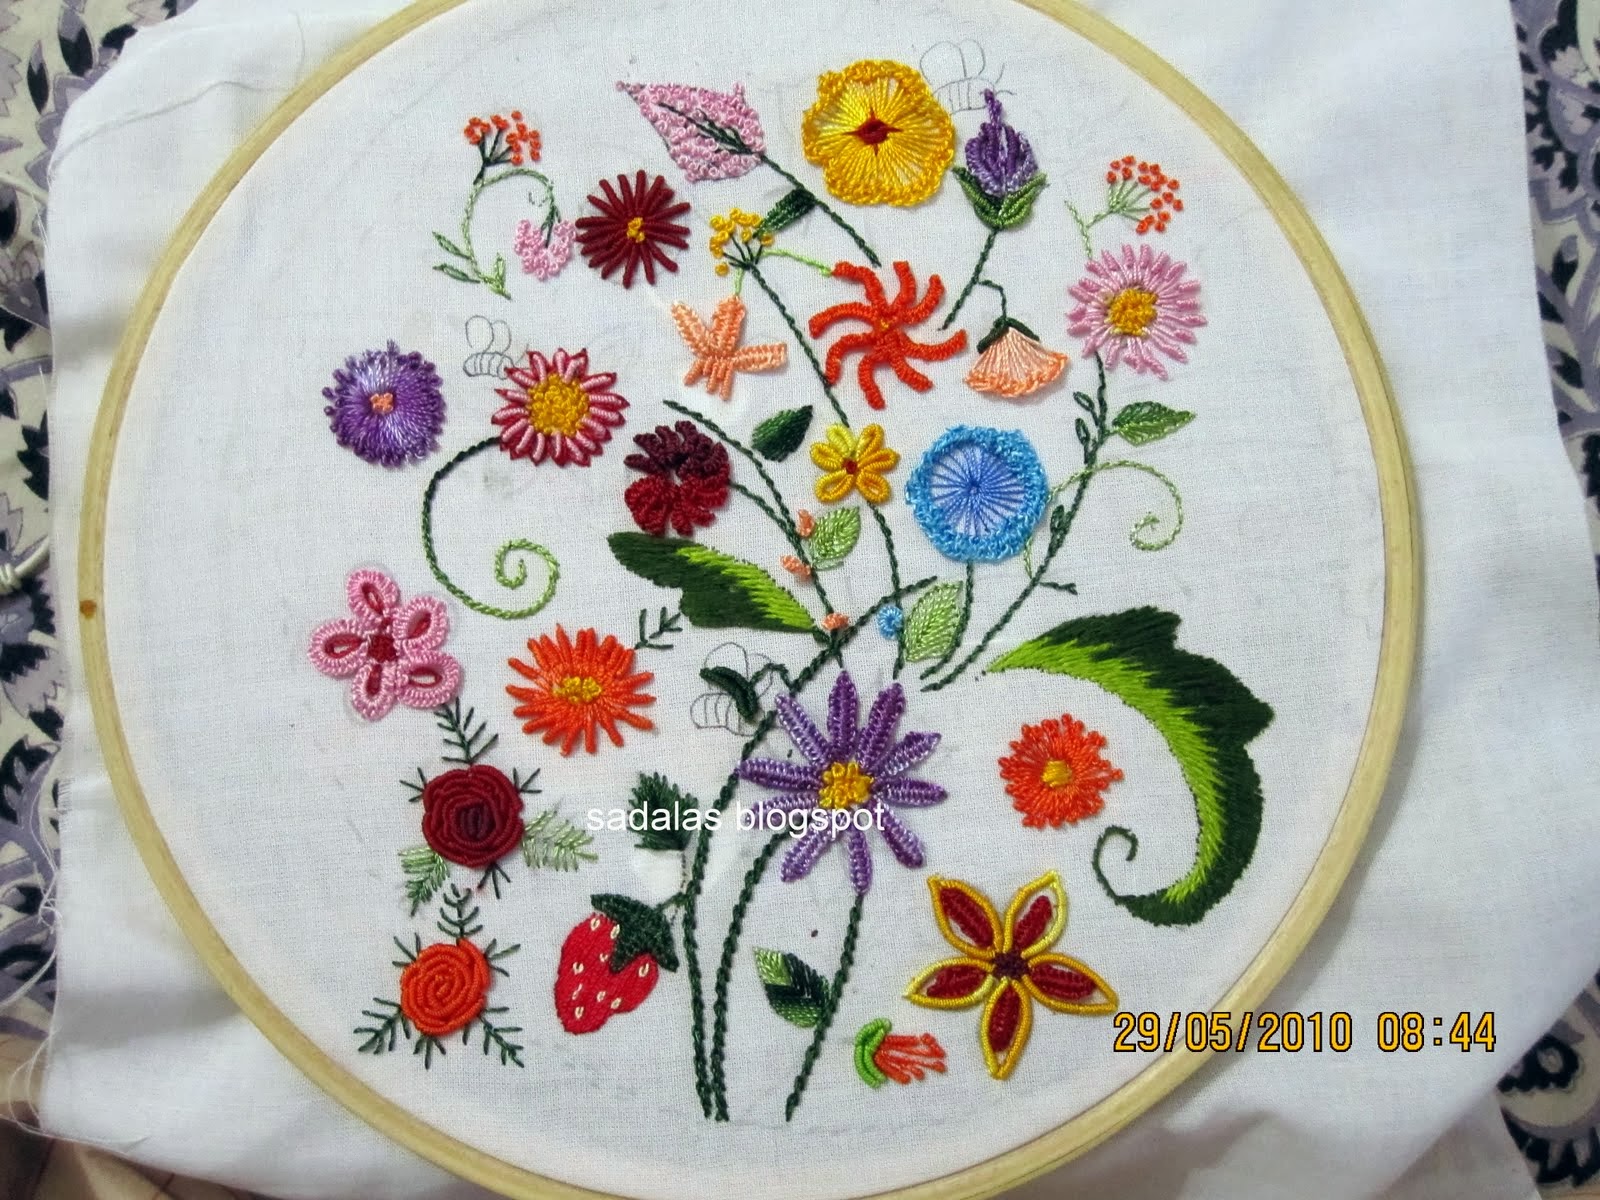 embroidery hand stitches stitch brazilian library stiches encyclopedia dimensional embroidered tipnut tutorials stitched flower fly sadala draw sampler did circle